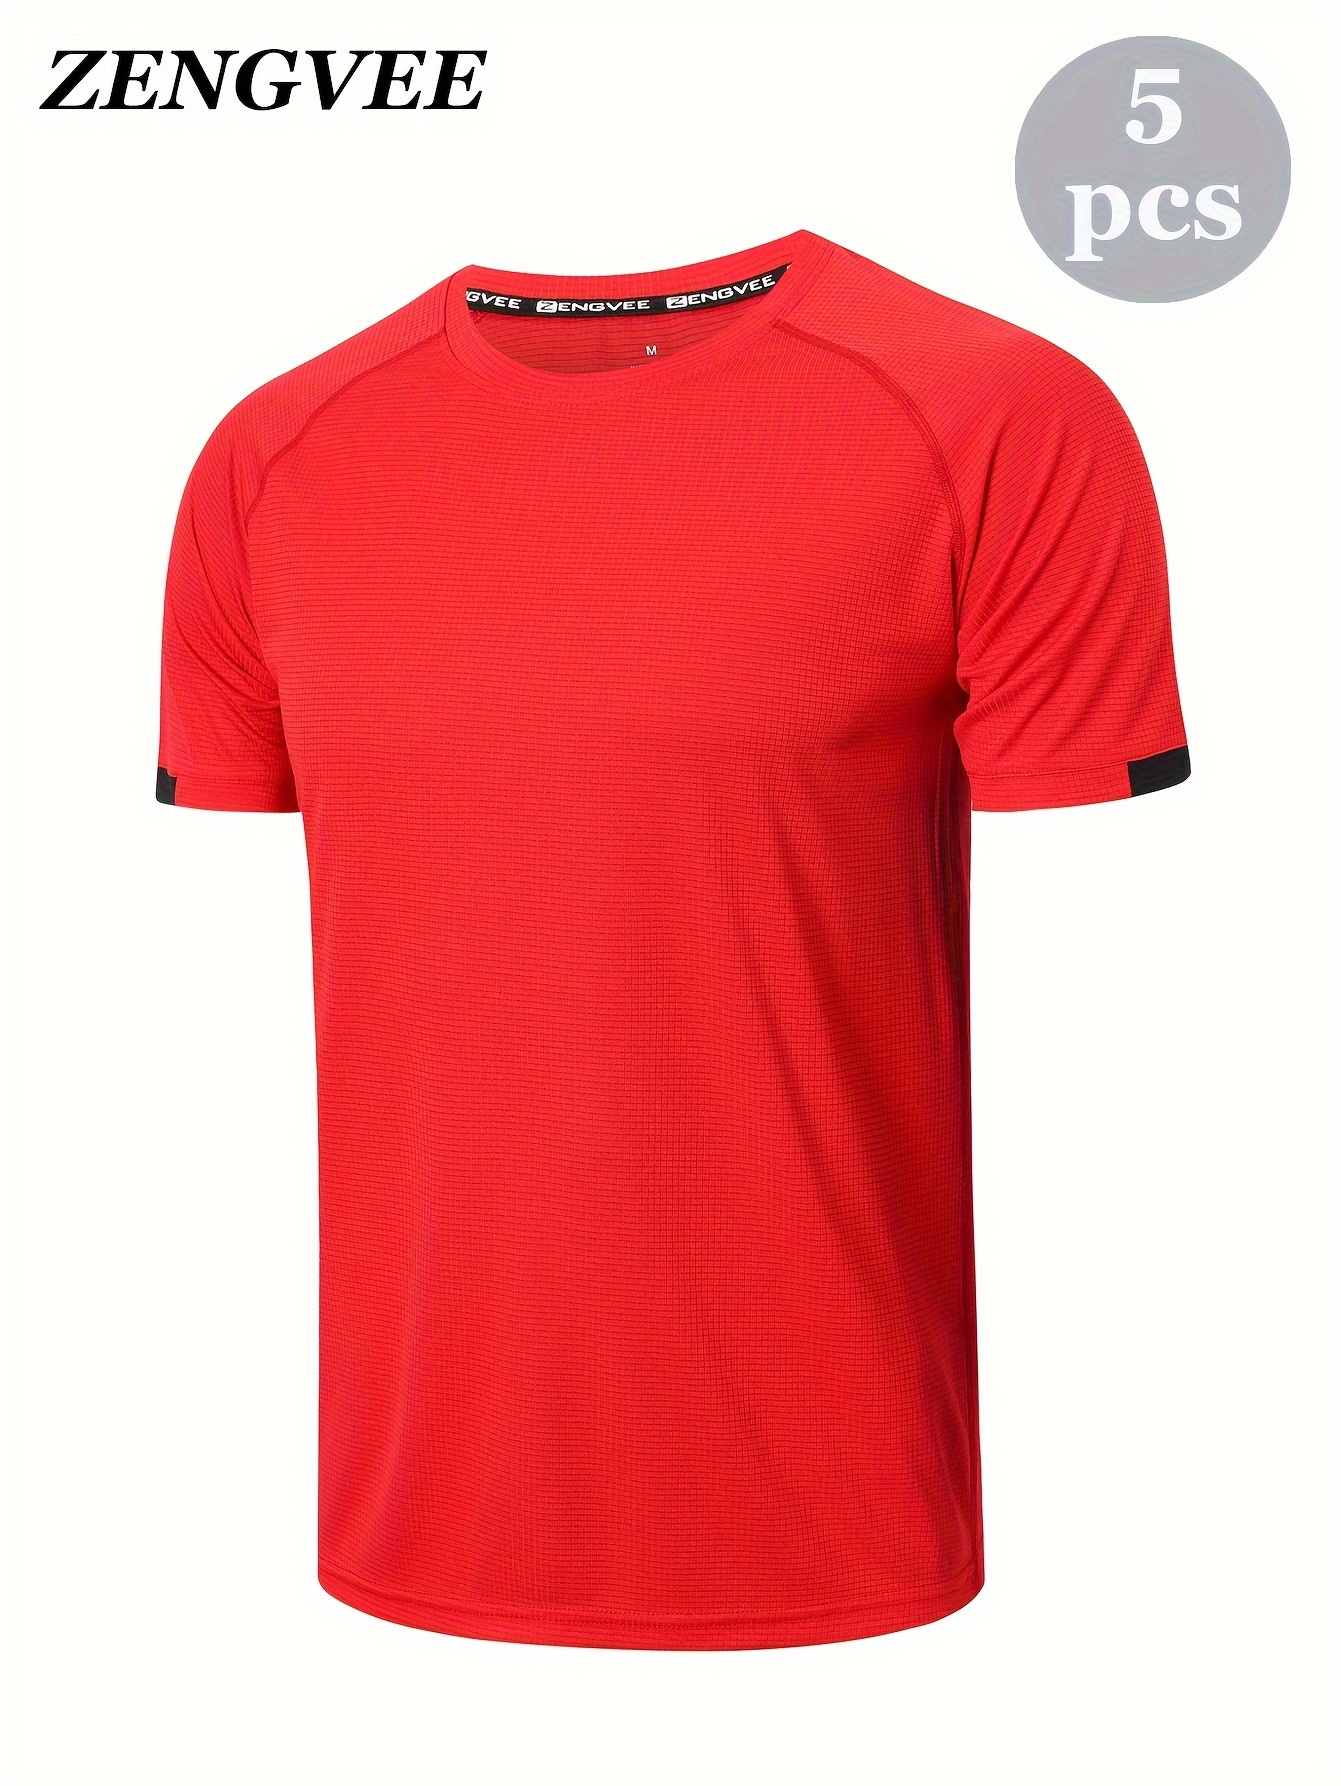 Men's Breathable Essential Crew Neck Fitness T-Shirt